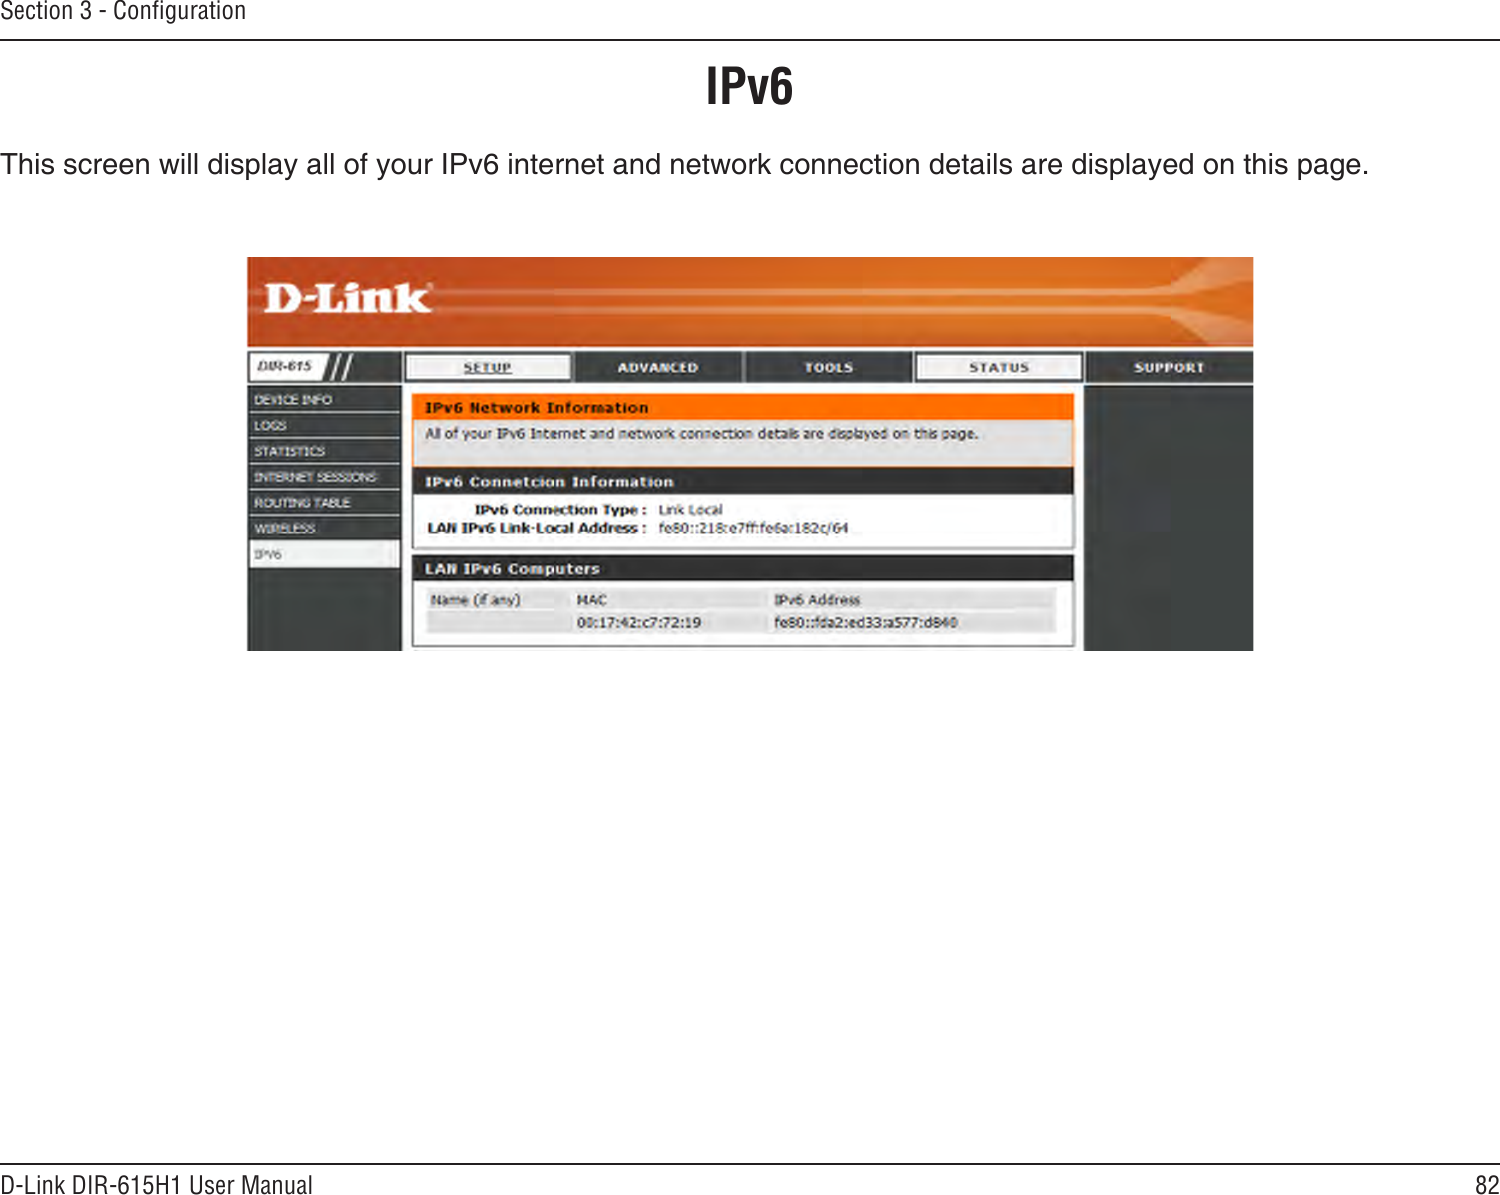 82D-Link DIR-615H1 User ManualSection 3 - CongurationIPv6This screen will display all of your IPv6 internet and network connection details are displayed on this page. 